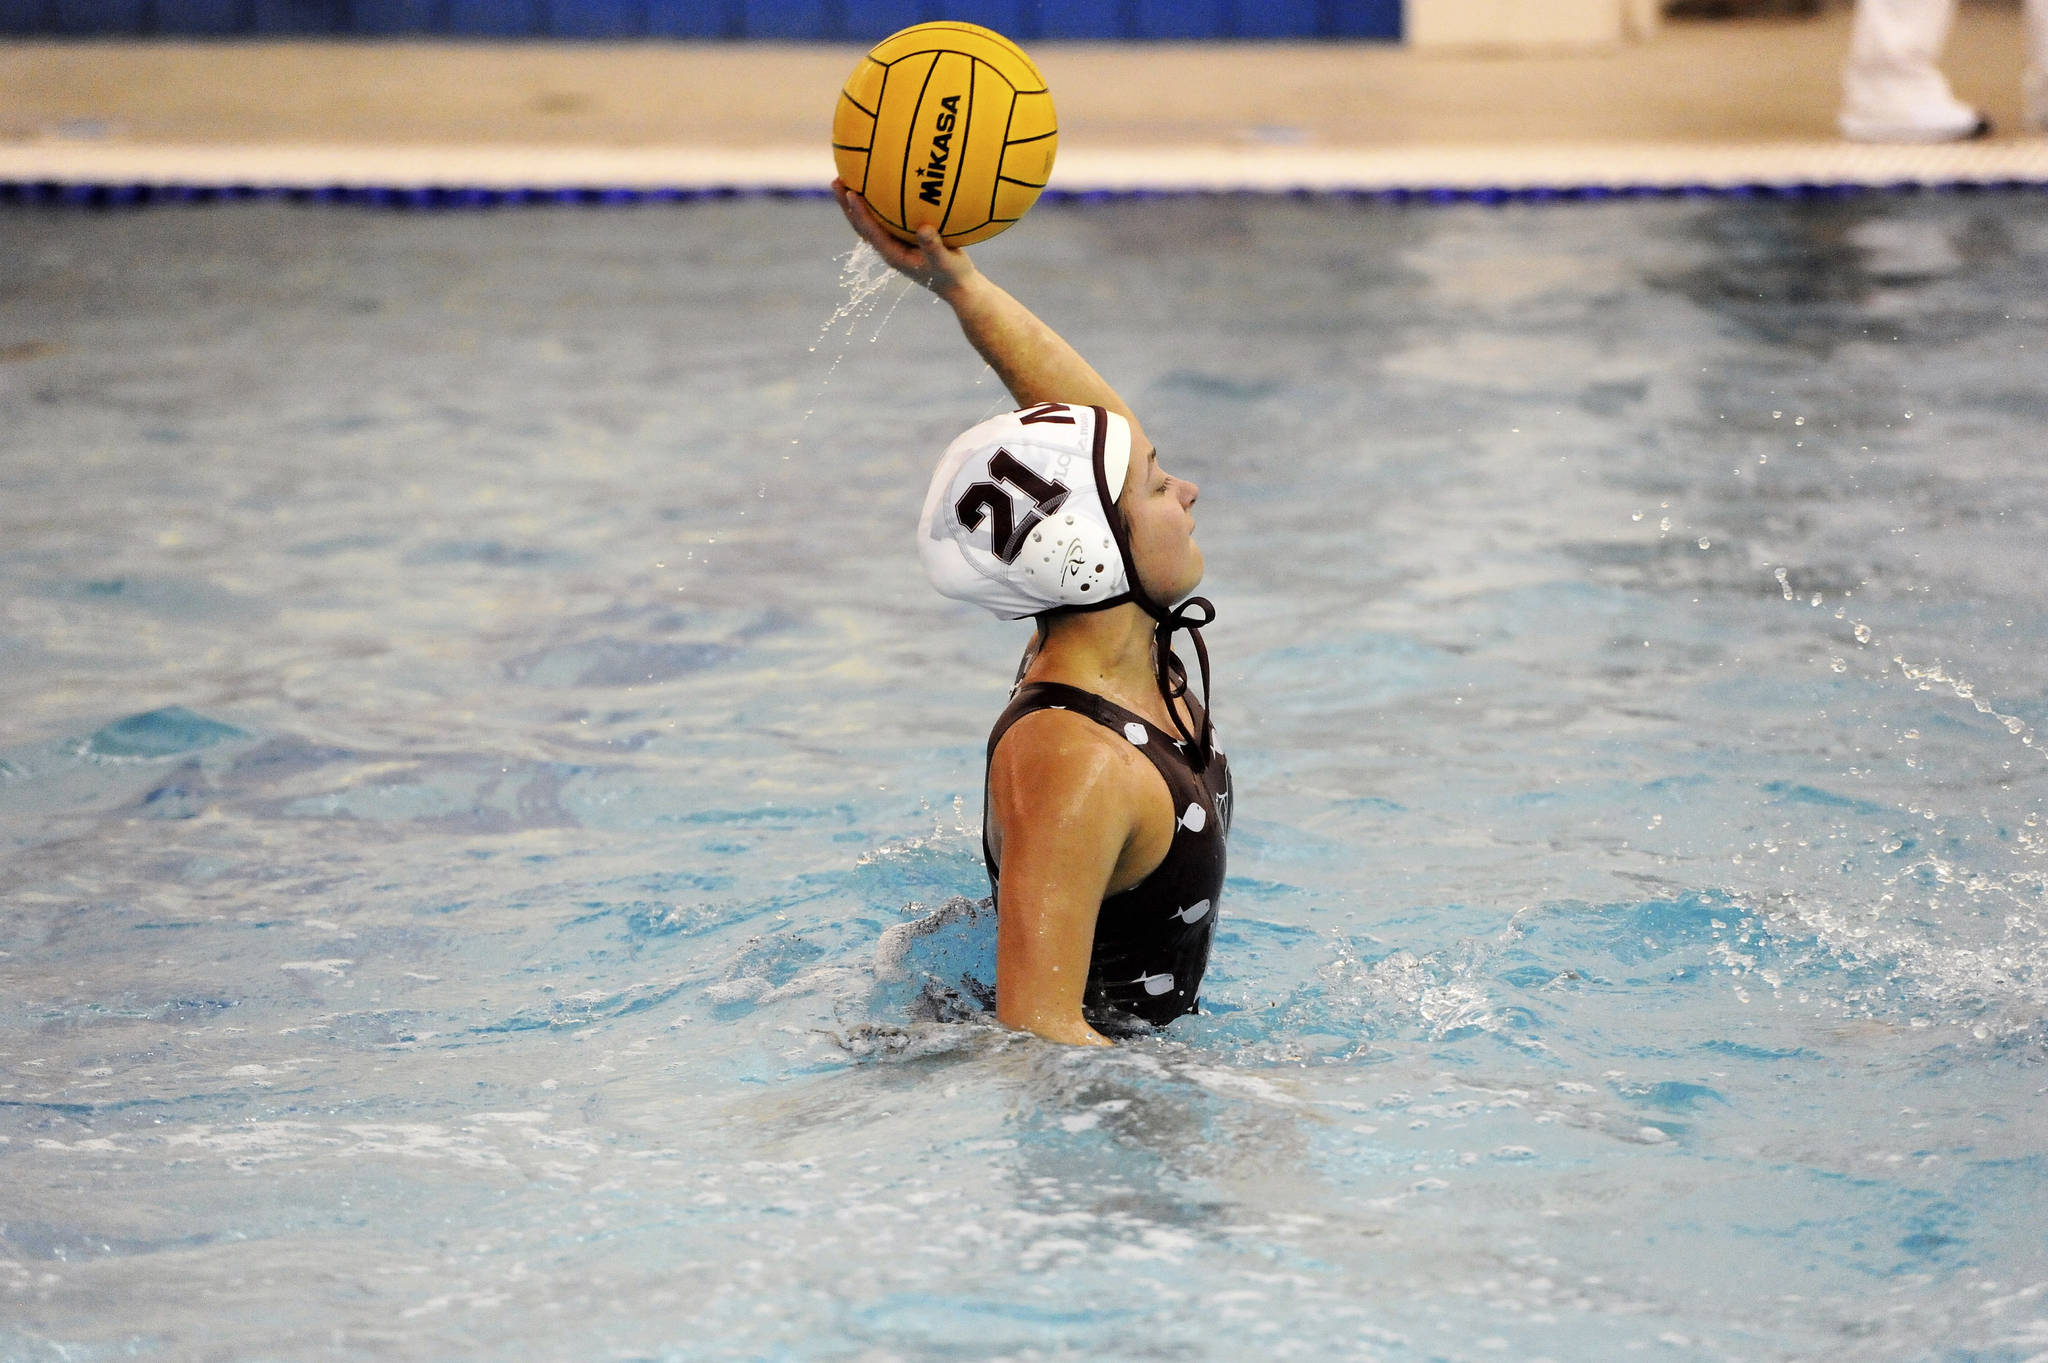 Photo courtesy of Debby Wilson                                Mercer Island Islanders girls water polo player Annie Ritcey, who is one of the team captains, unleashes a pass during a game during the 2018 season. The Islanders have just one loss thus far.